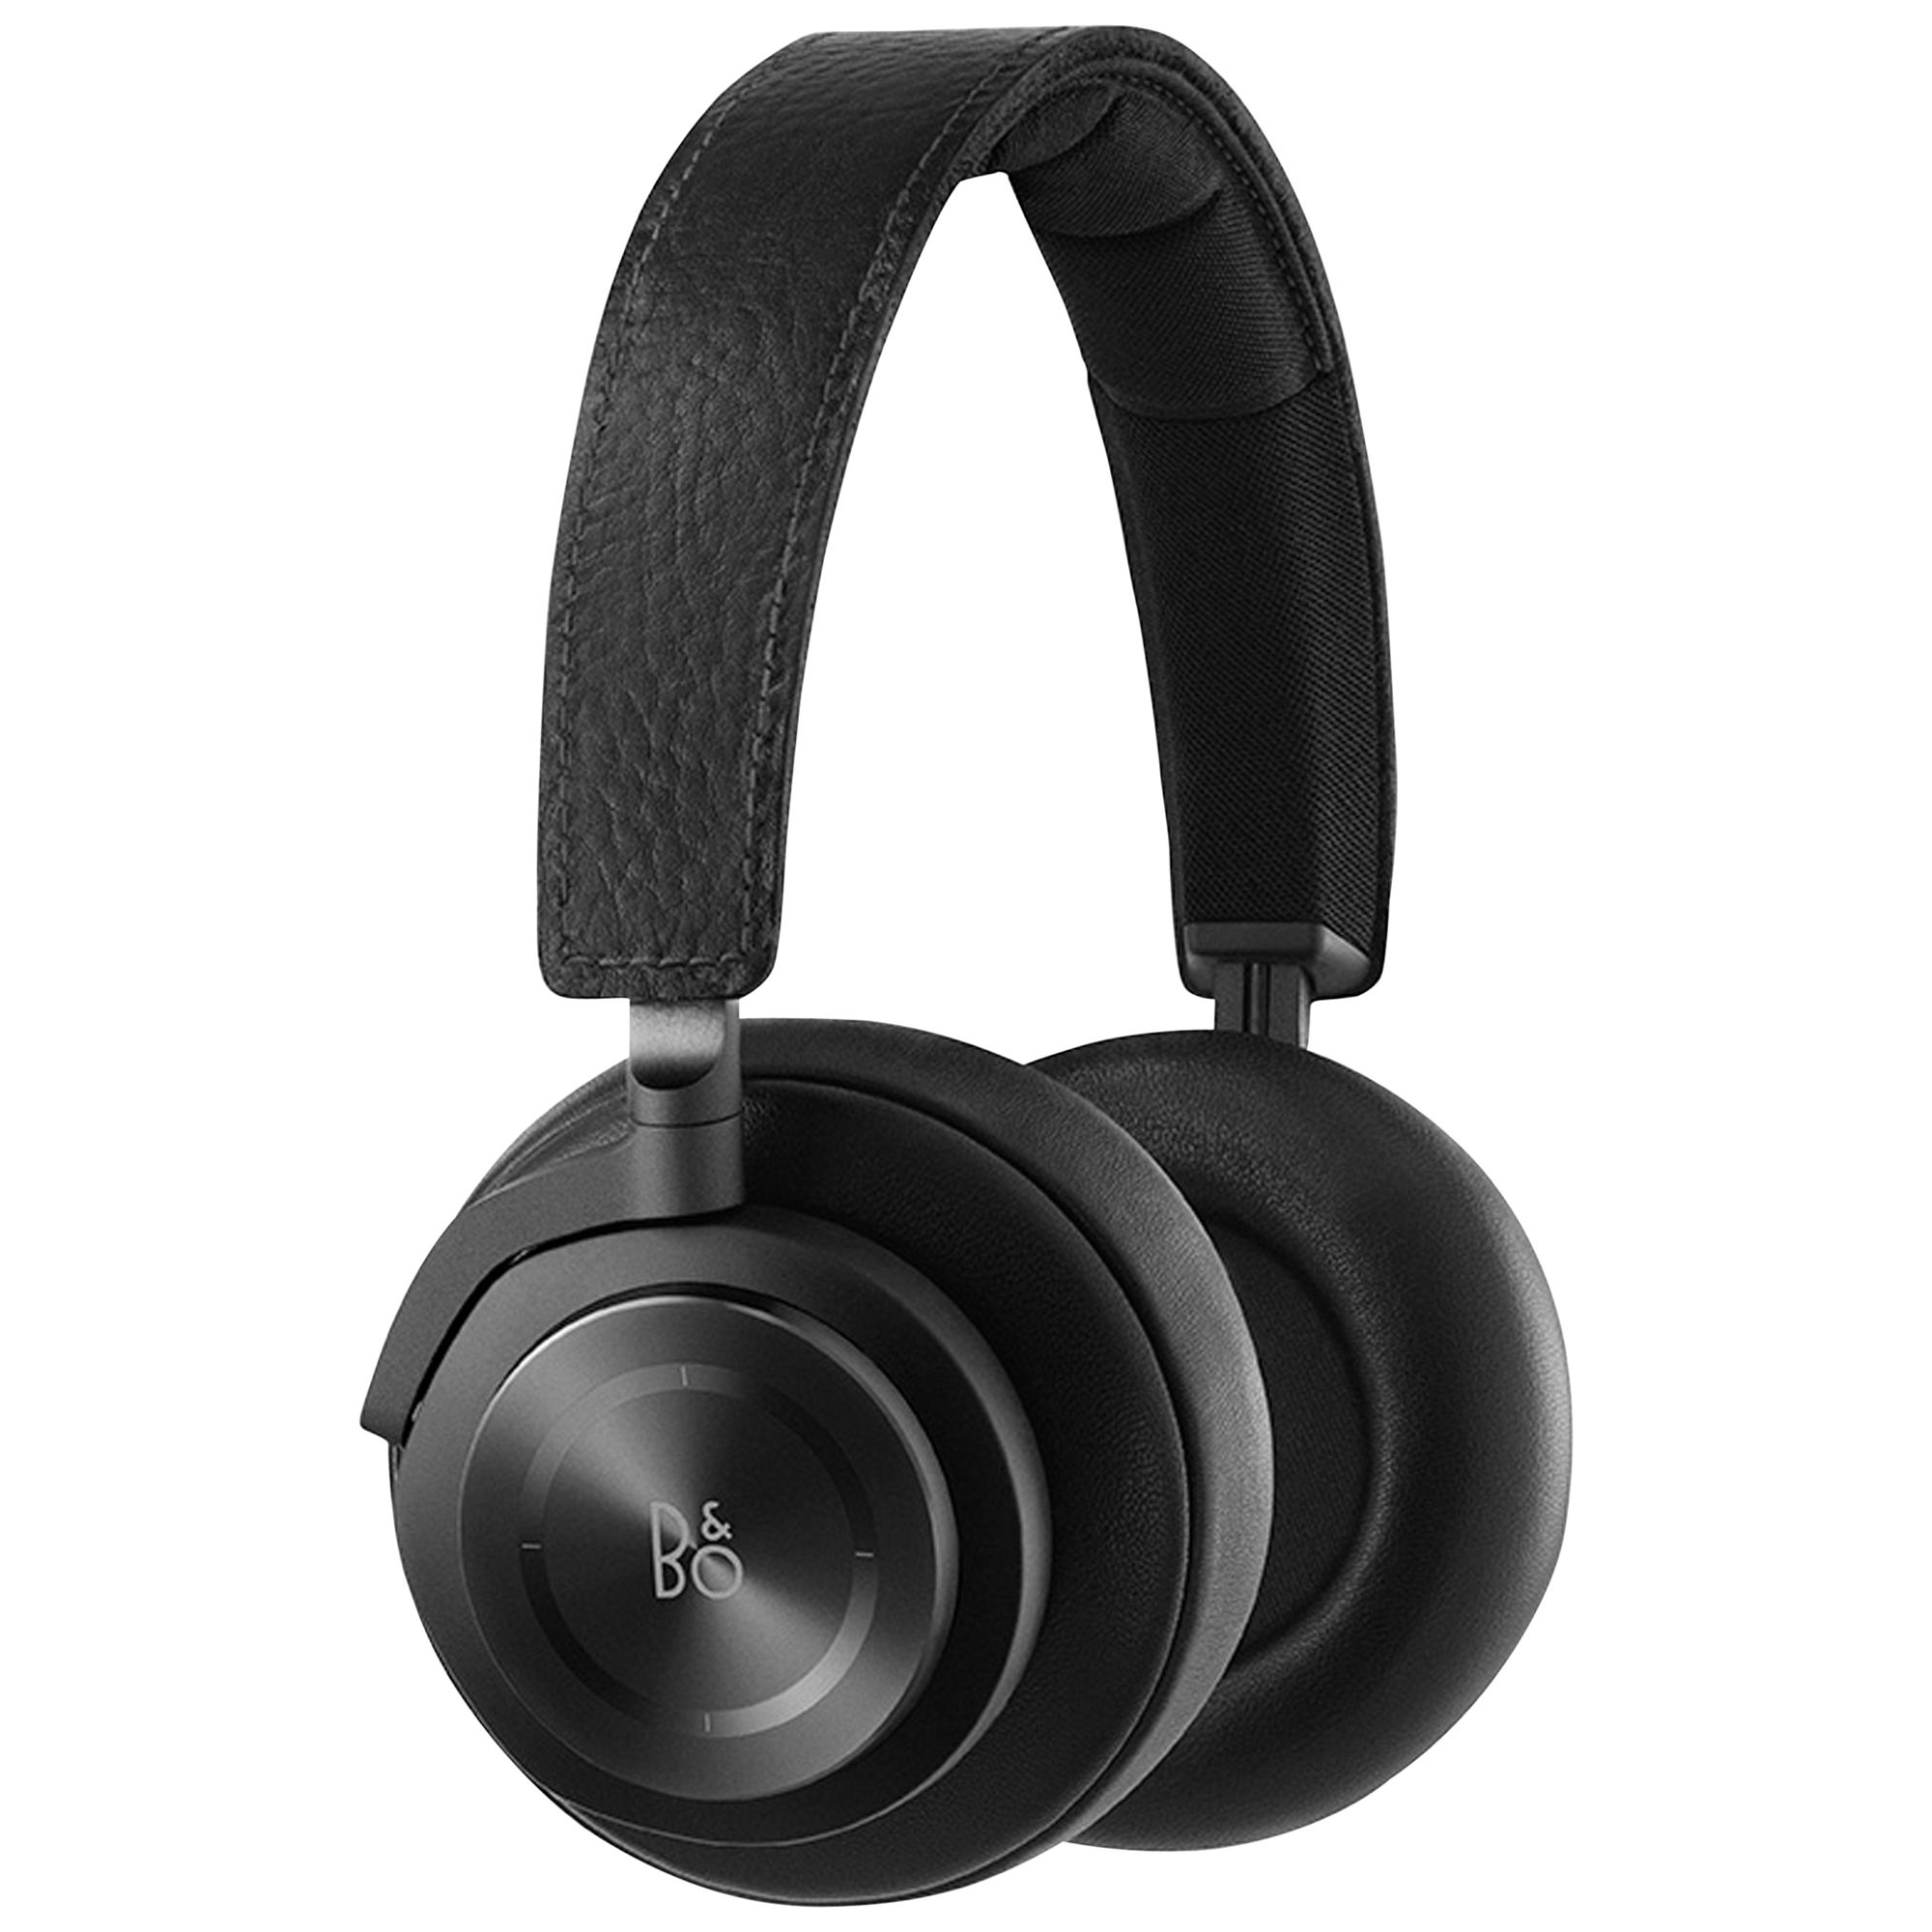 Bang & Olufsen Beoplay H7 Wireless Bluetooth Over-Ear Headphones with Intuitive Touch Interface